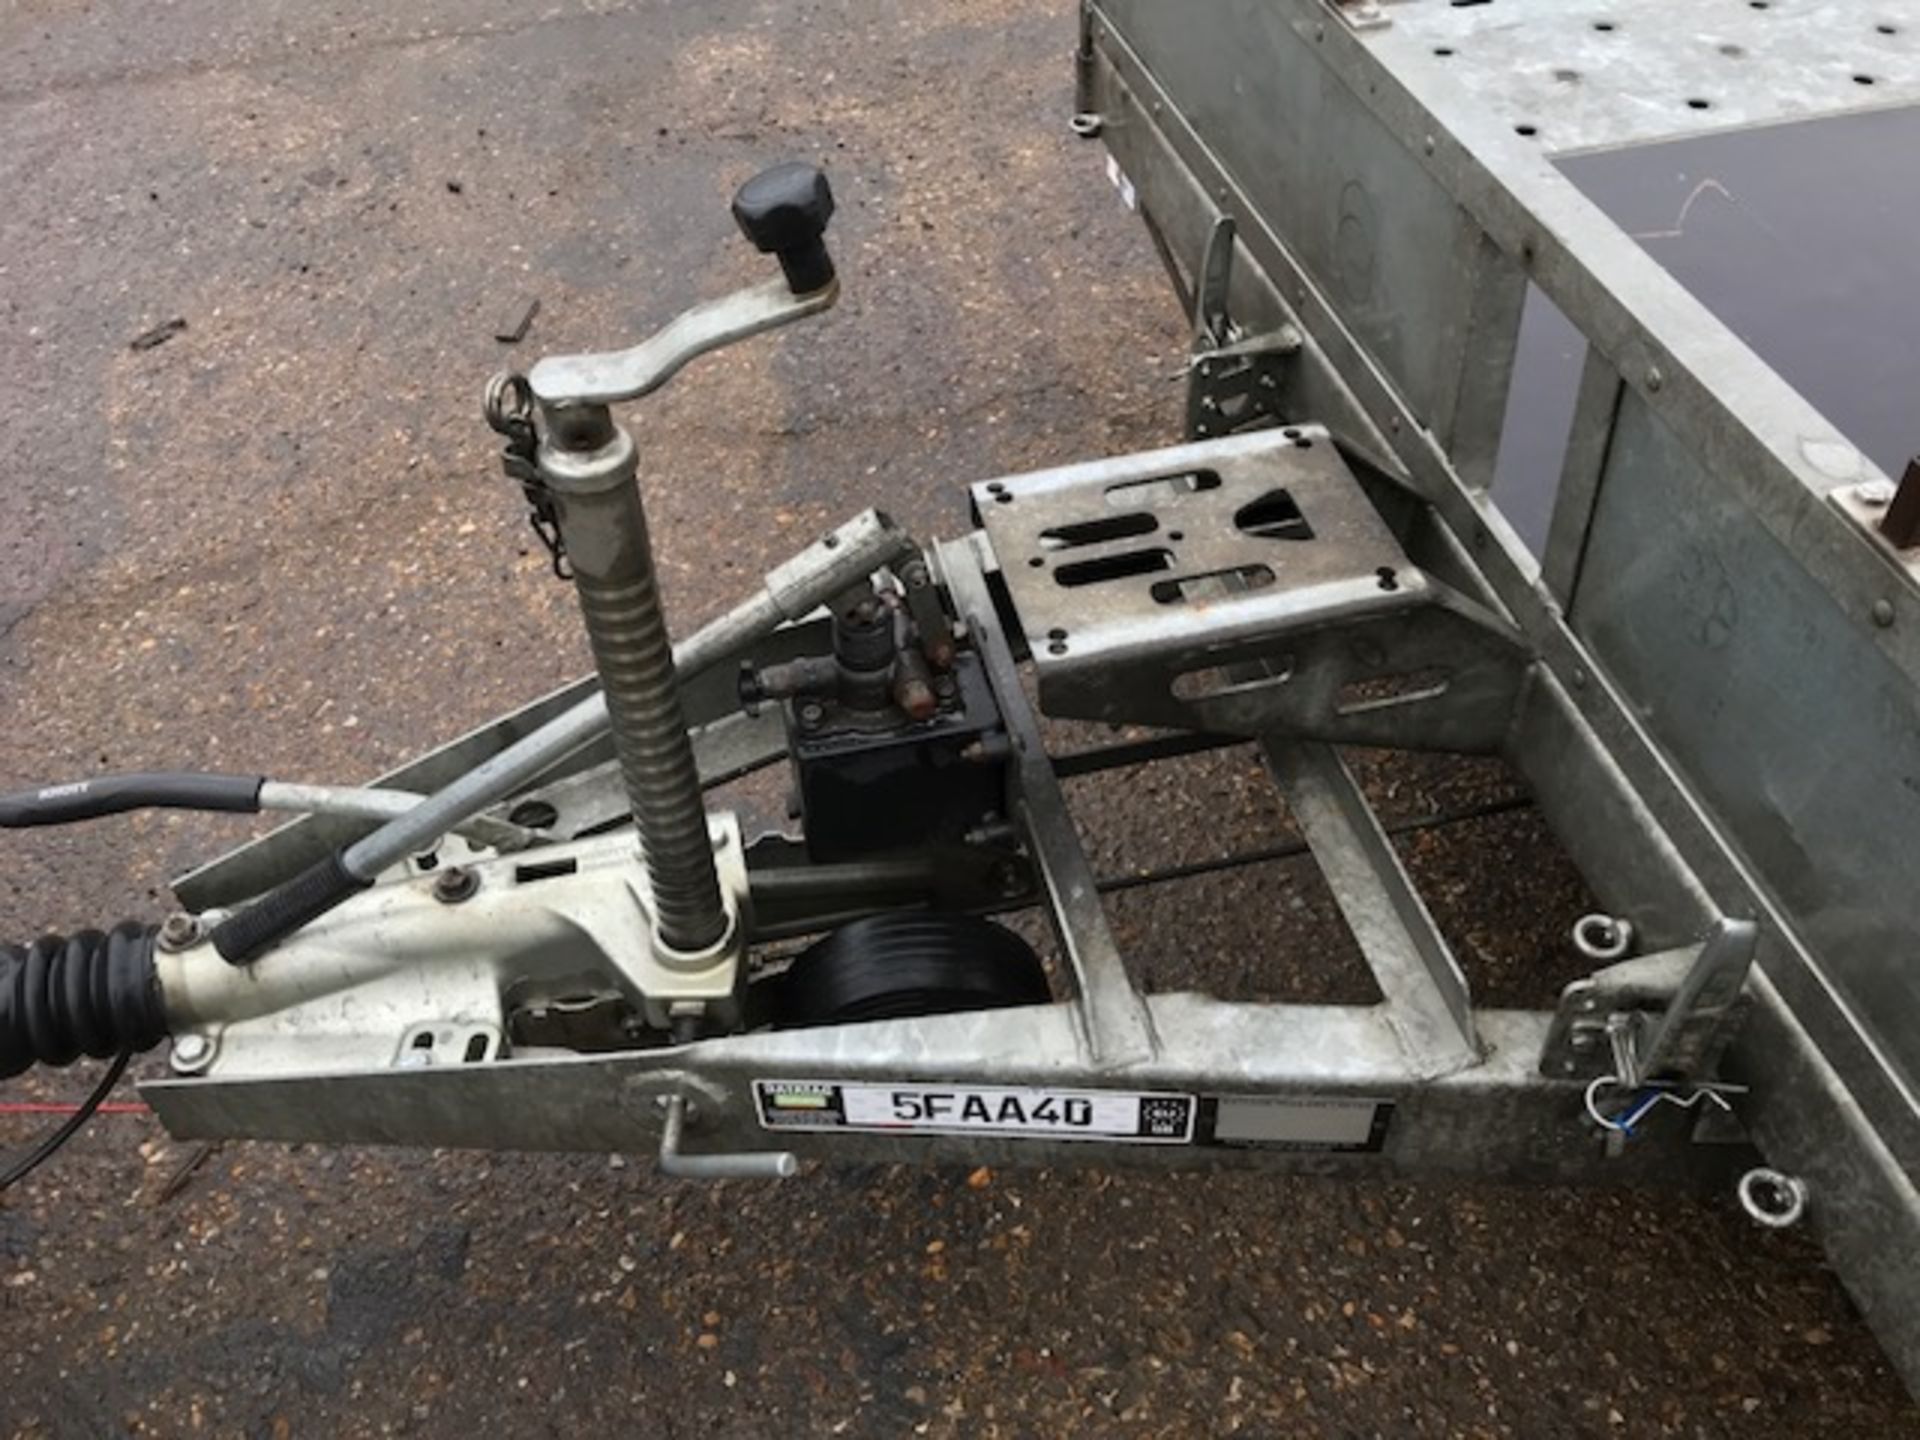 BATESON TILT BED TRIAXLED TRAILER YEAR 2015. OWNED FROM NEW. DATA TAGGED. 20FT X 7FT BED SIZE. - Image 4 of 14